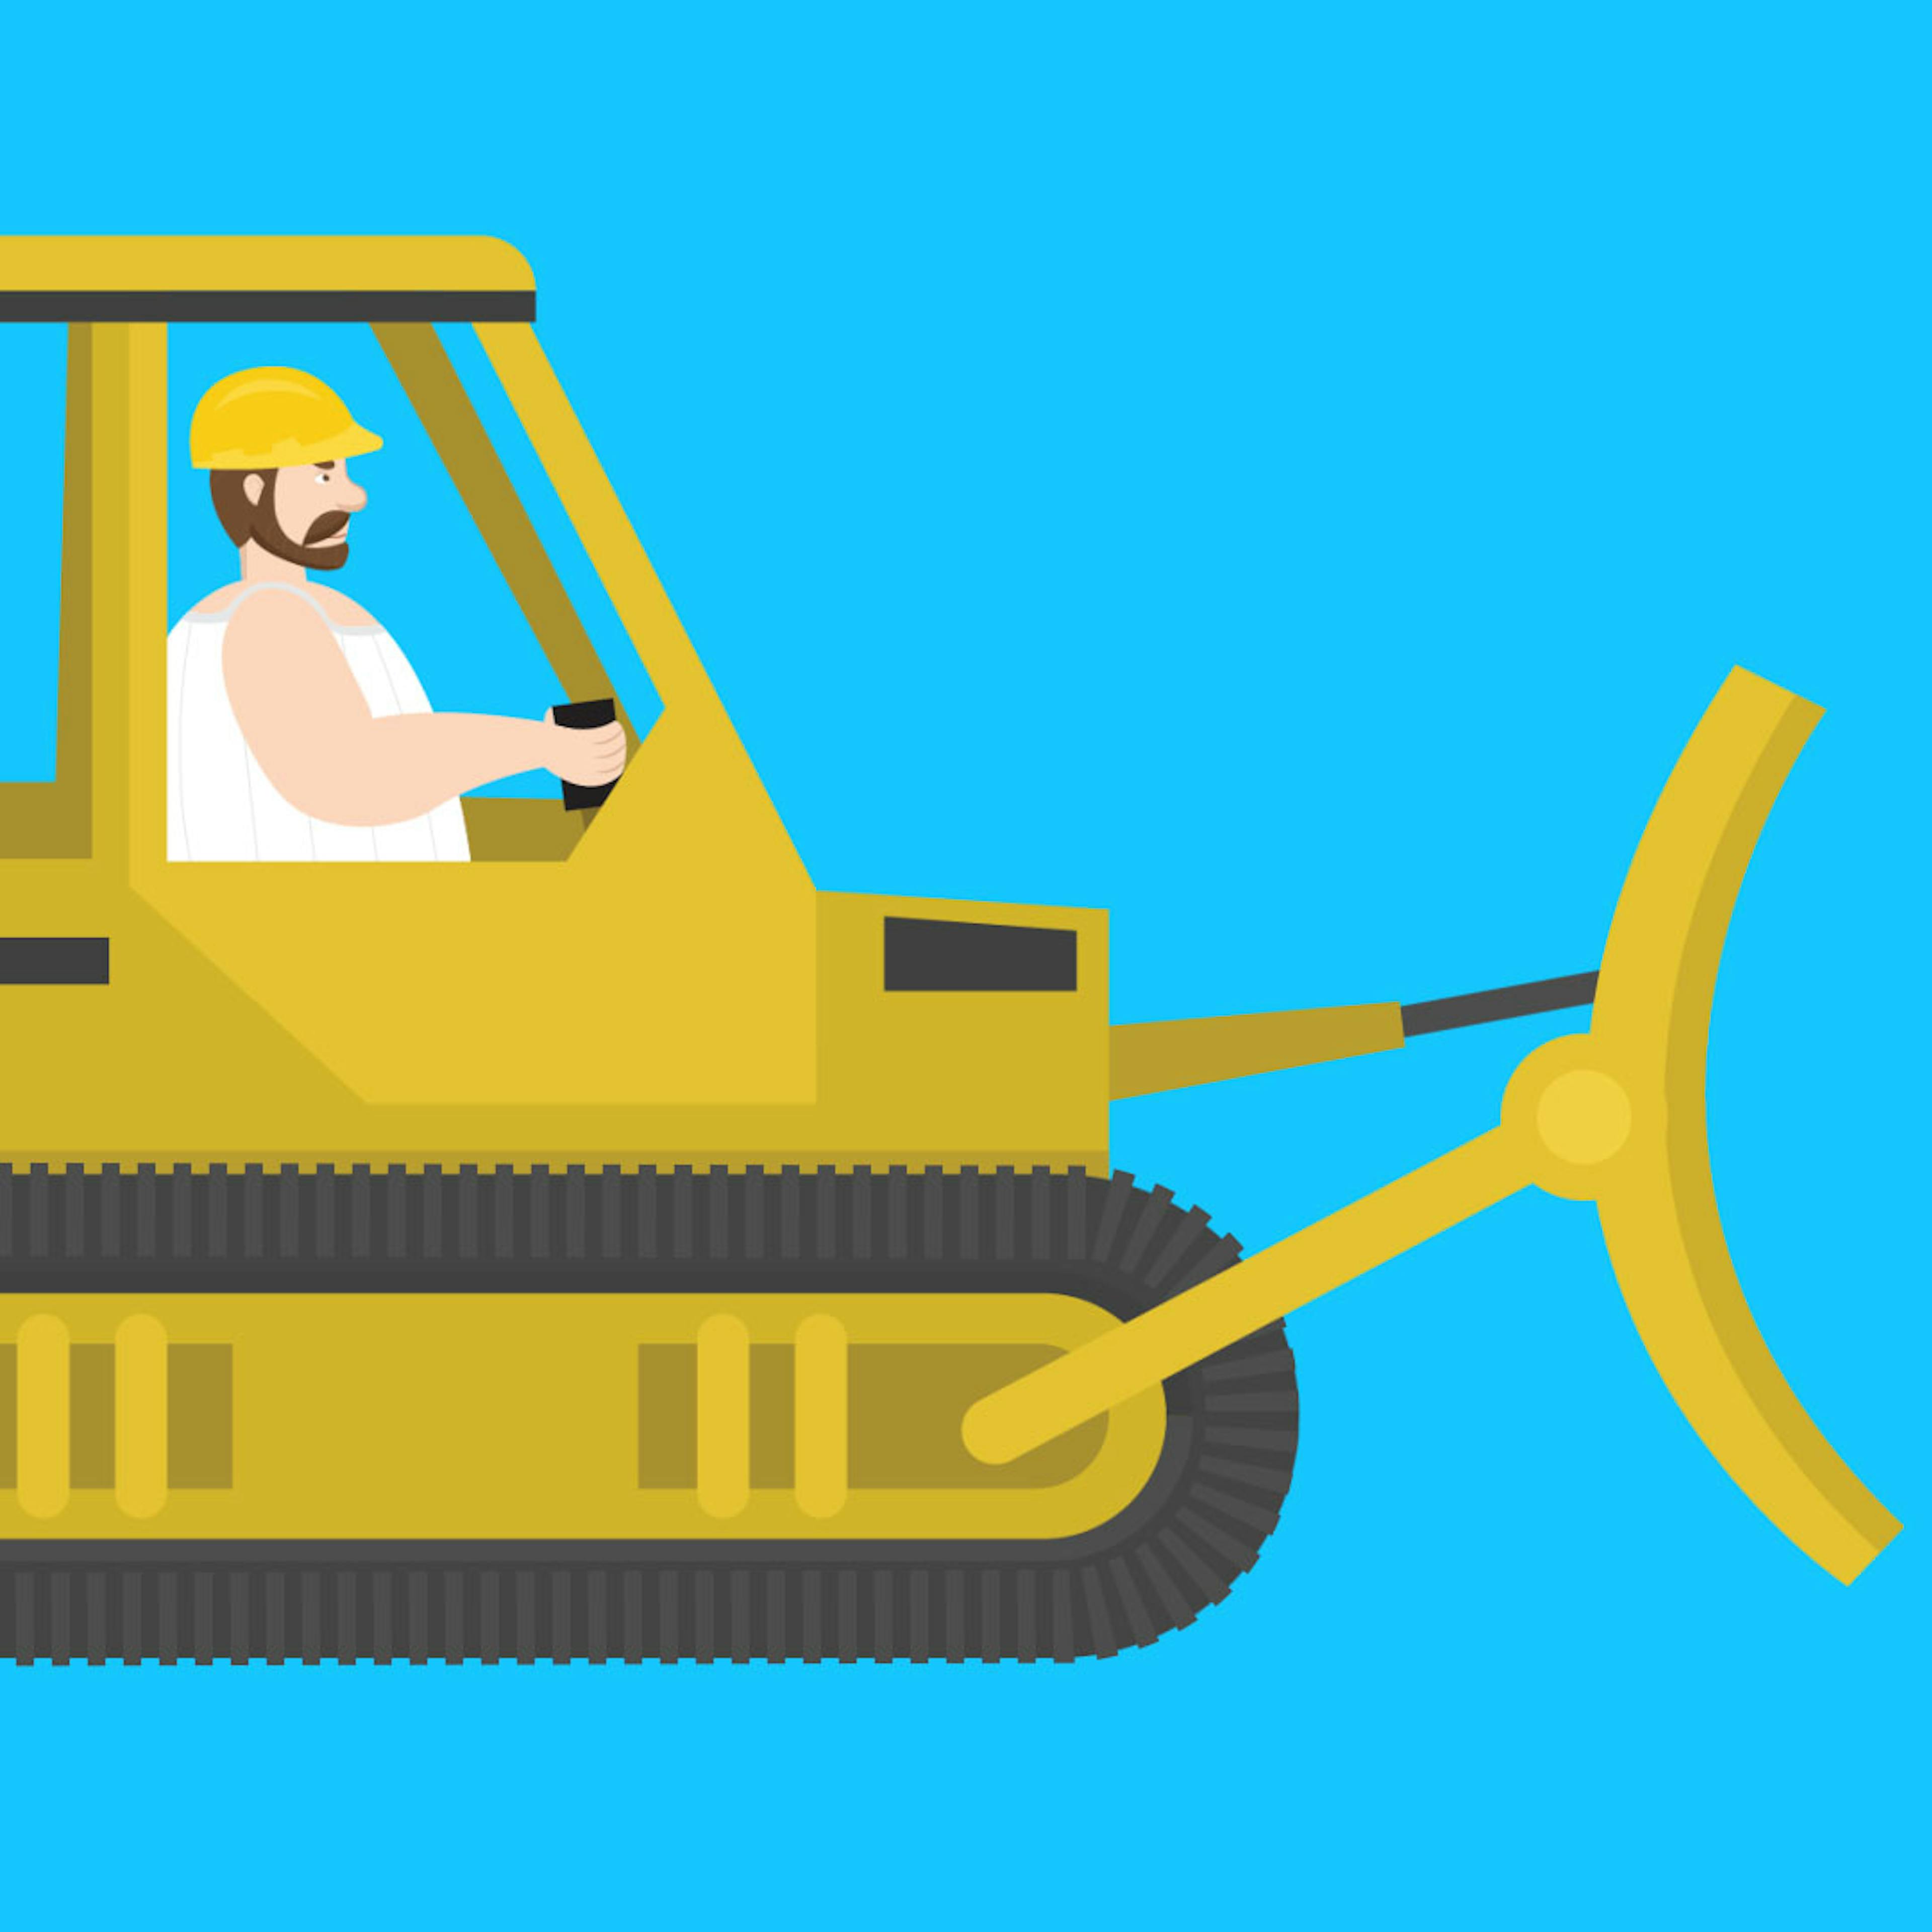 A bearded man in a tank top and hard hat drives a bulldozer